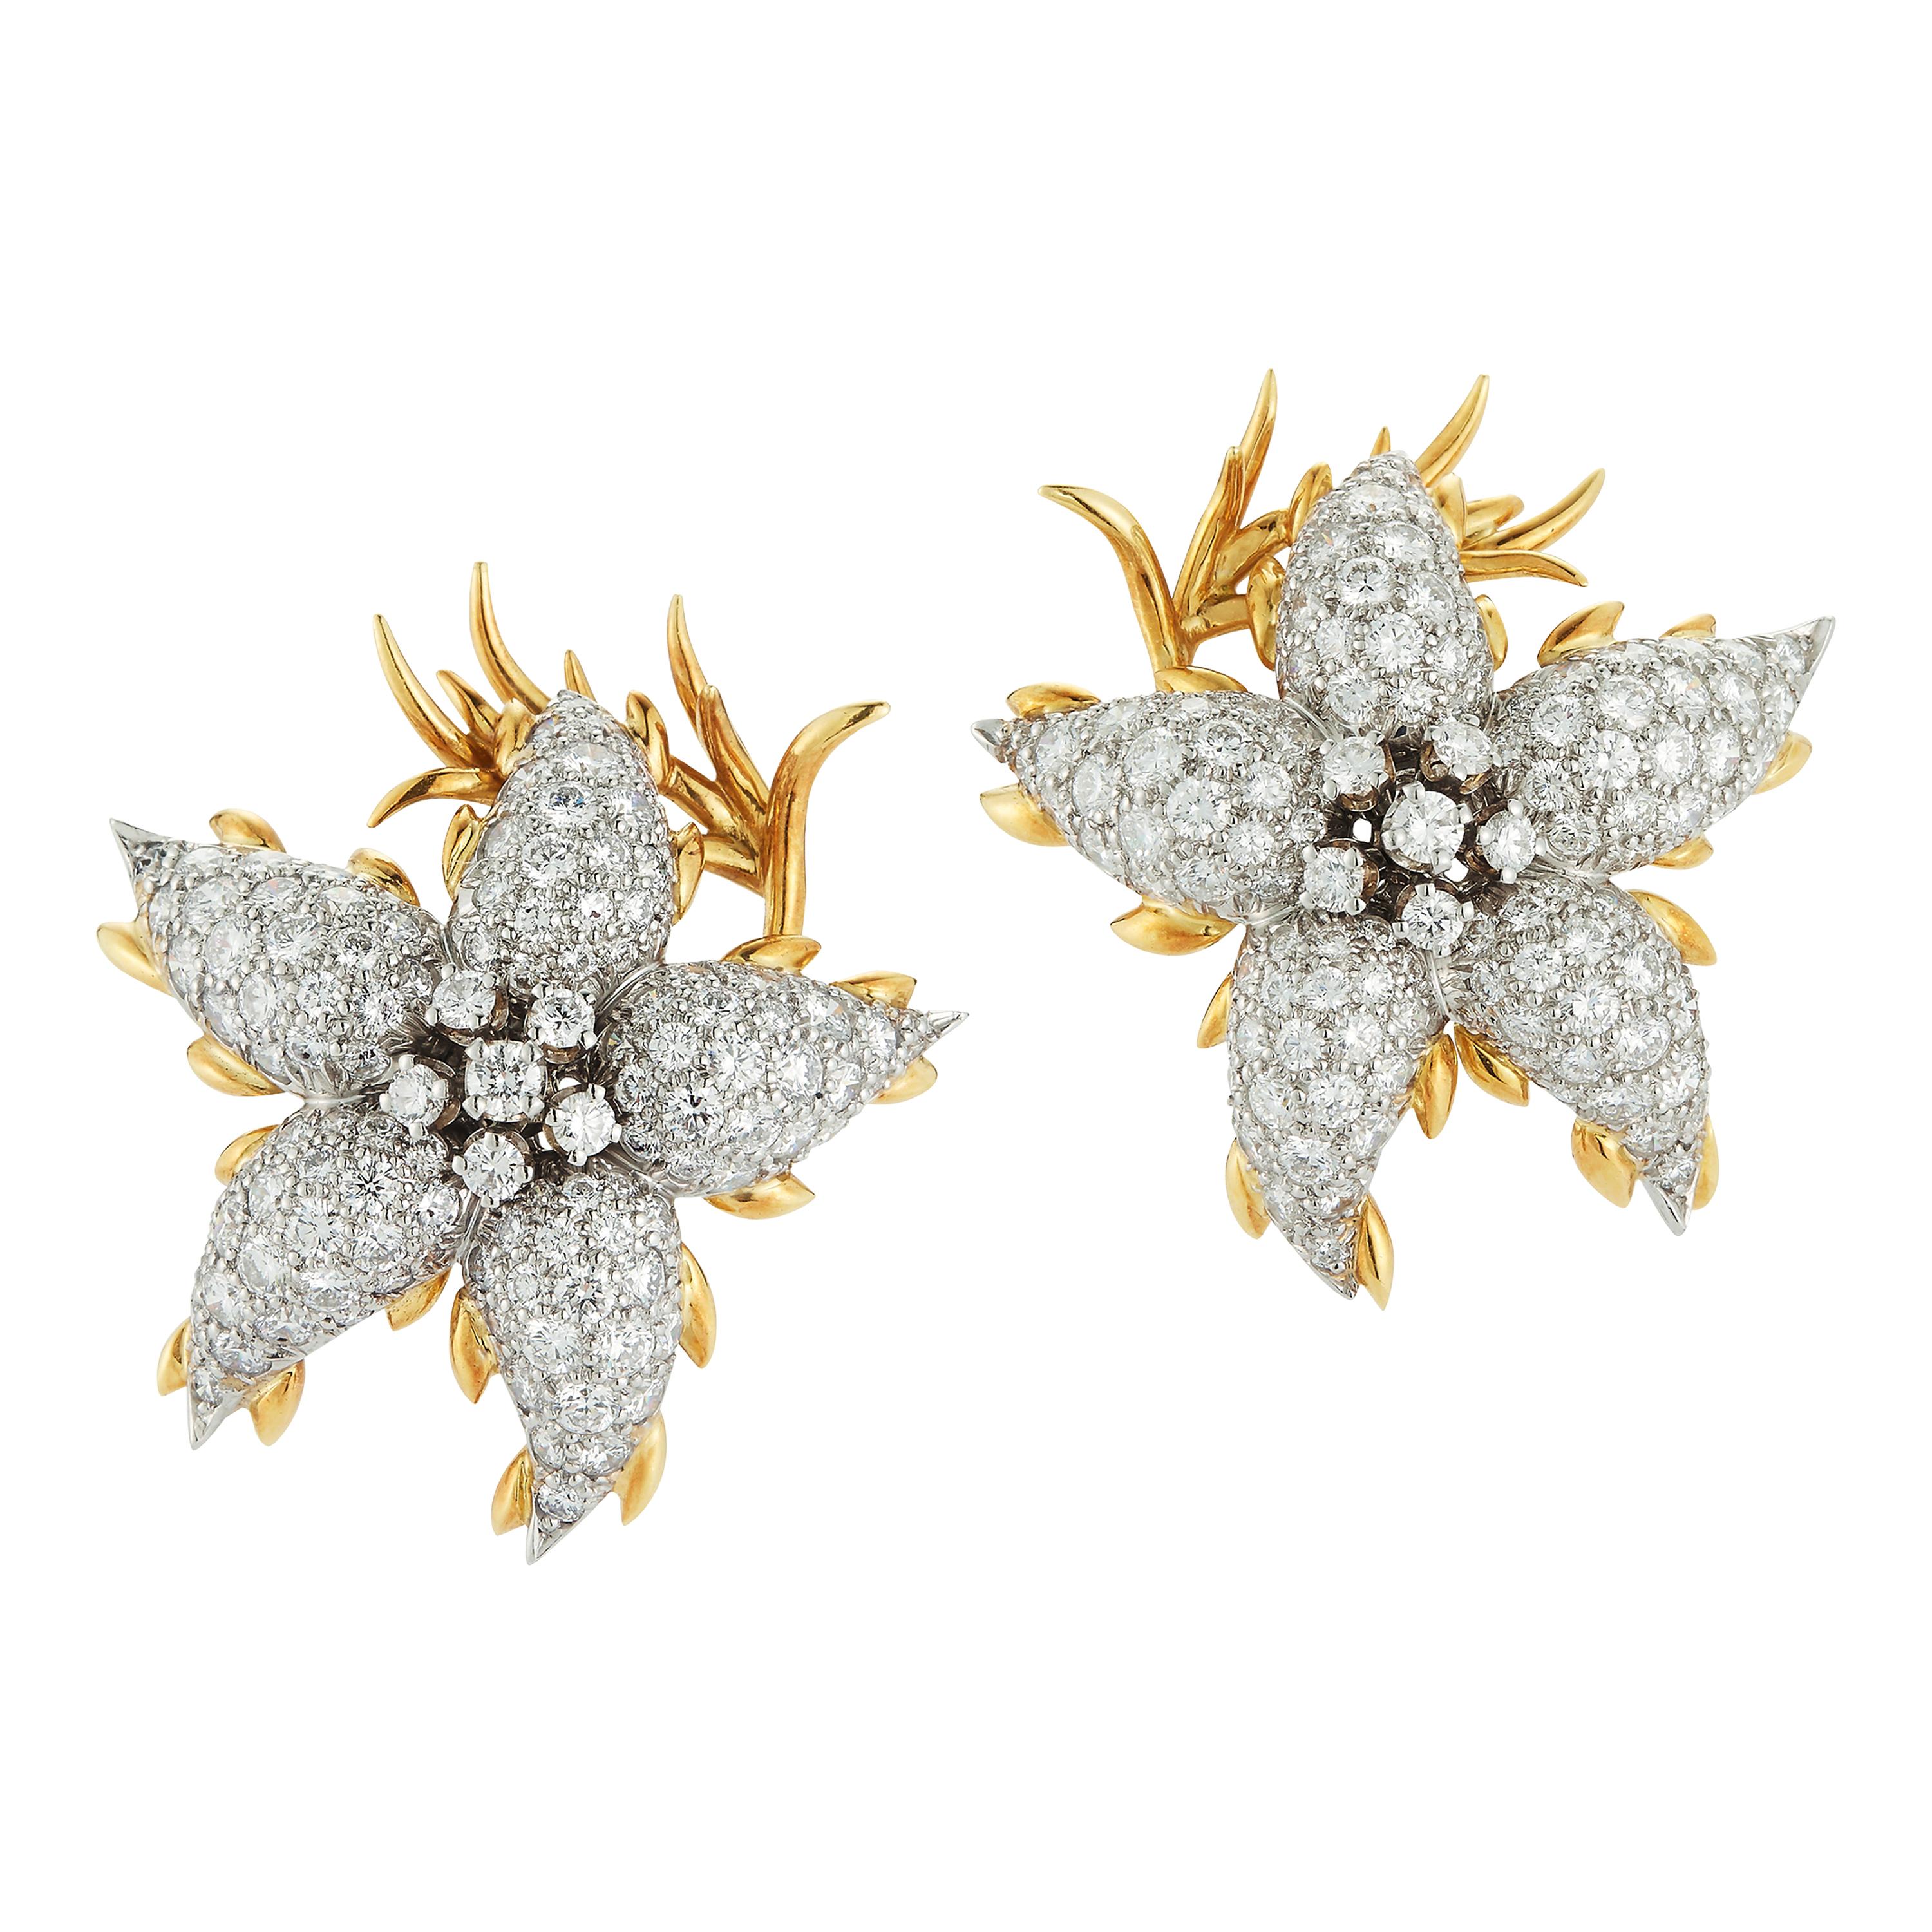 Large Size Diamond Floral Earrings Made by Jean Schlumberger for Tiffany & Co.